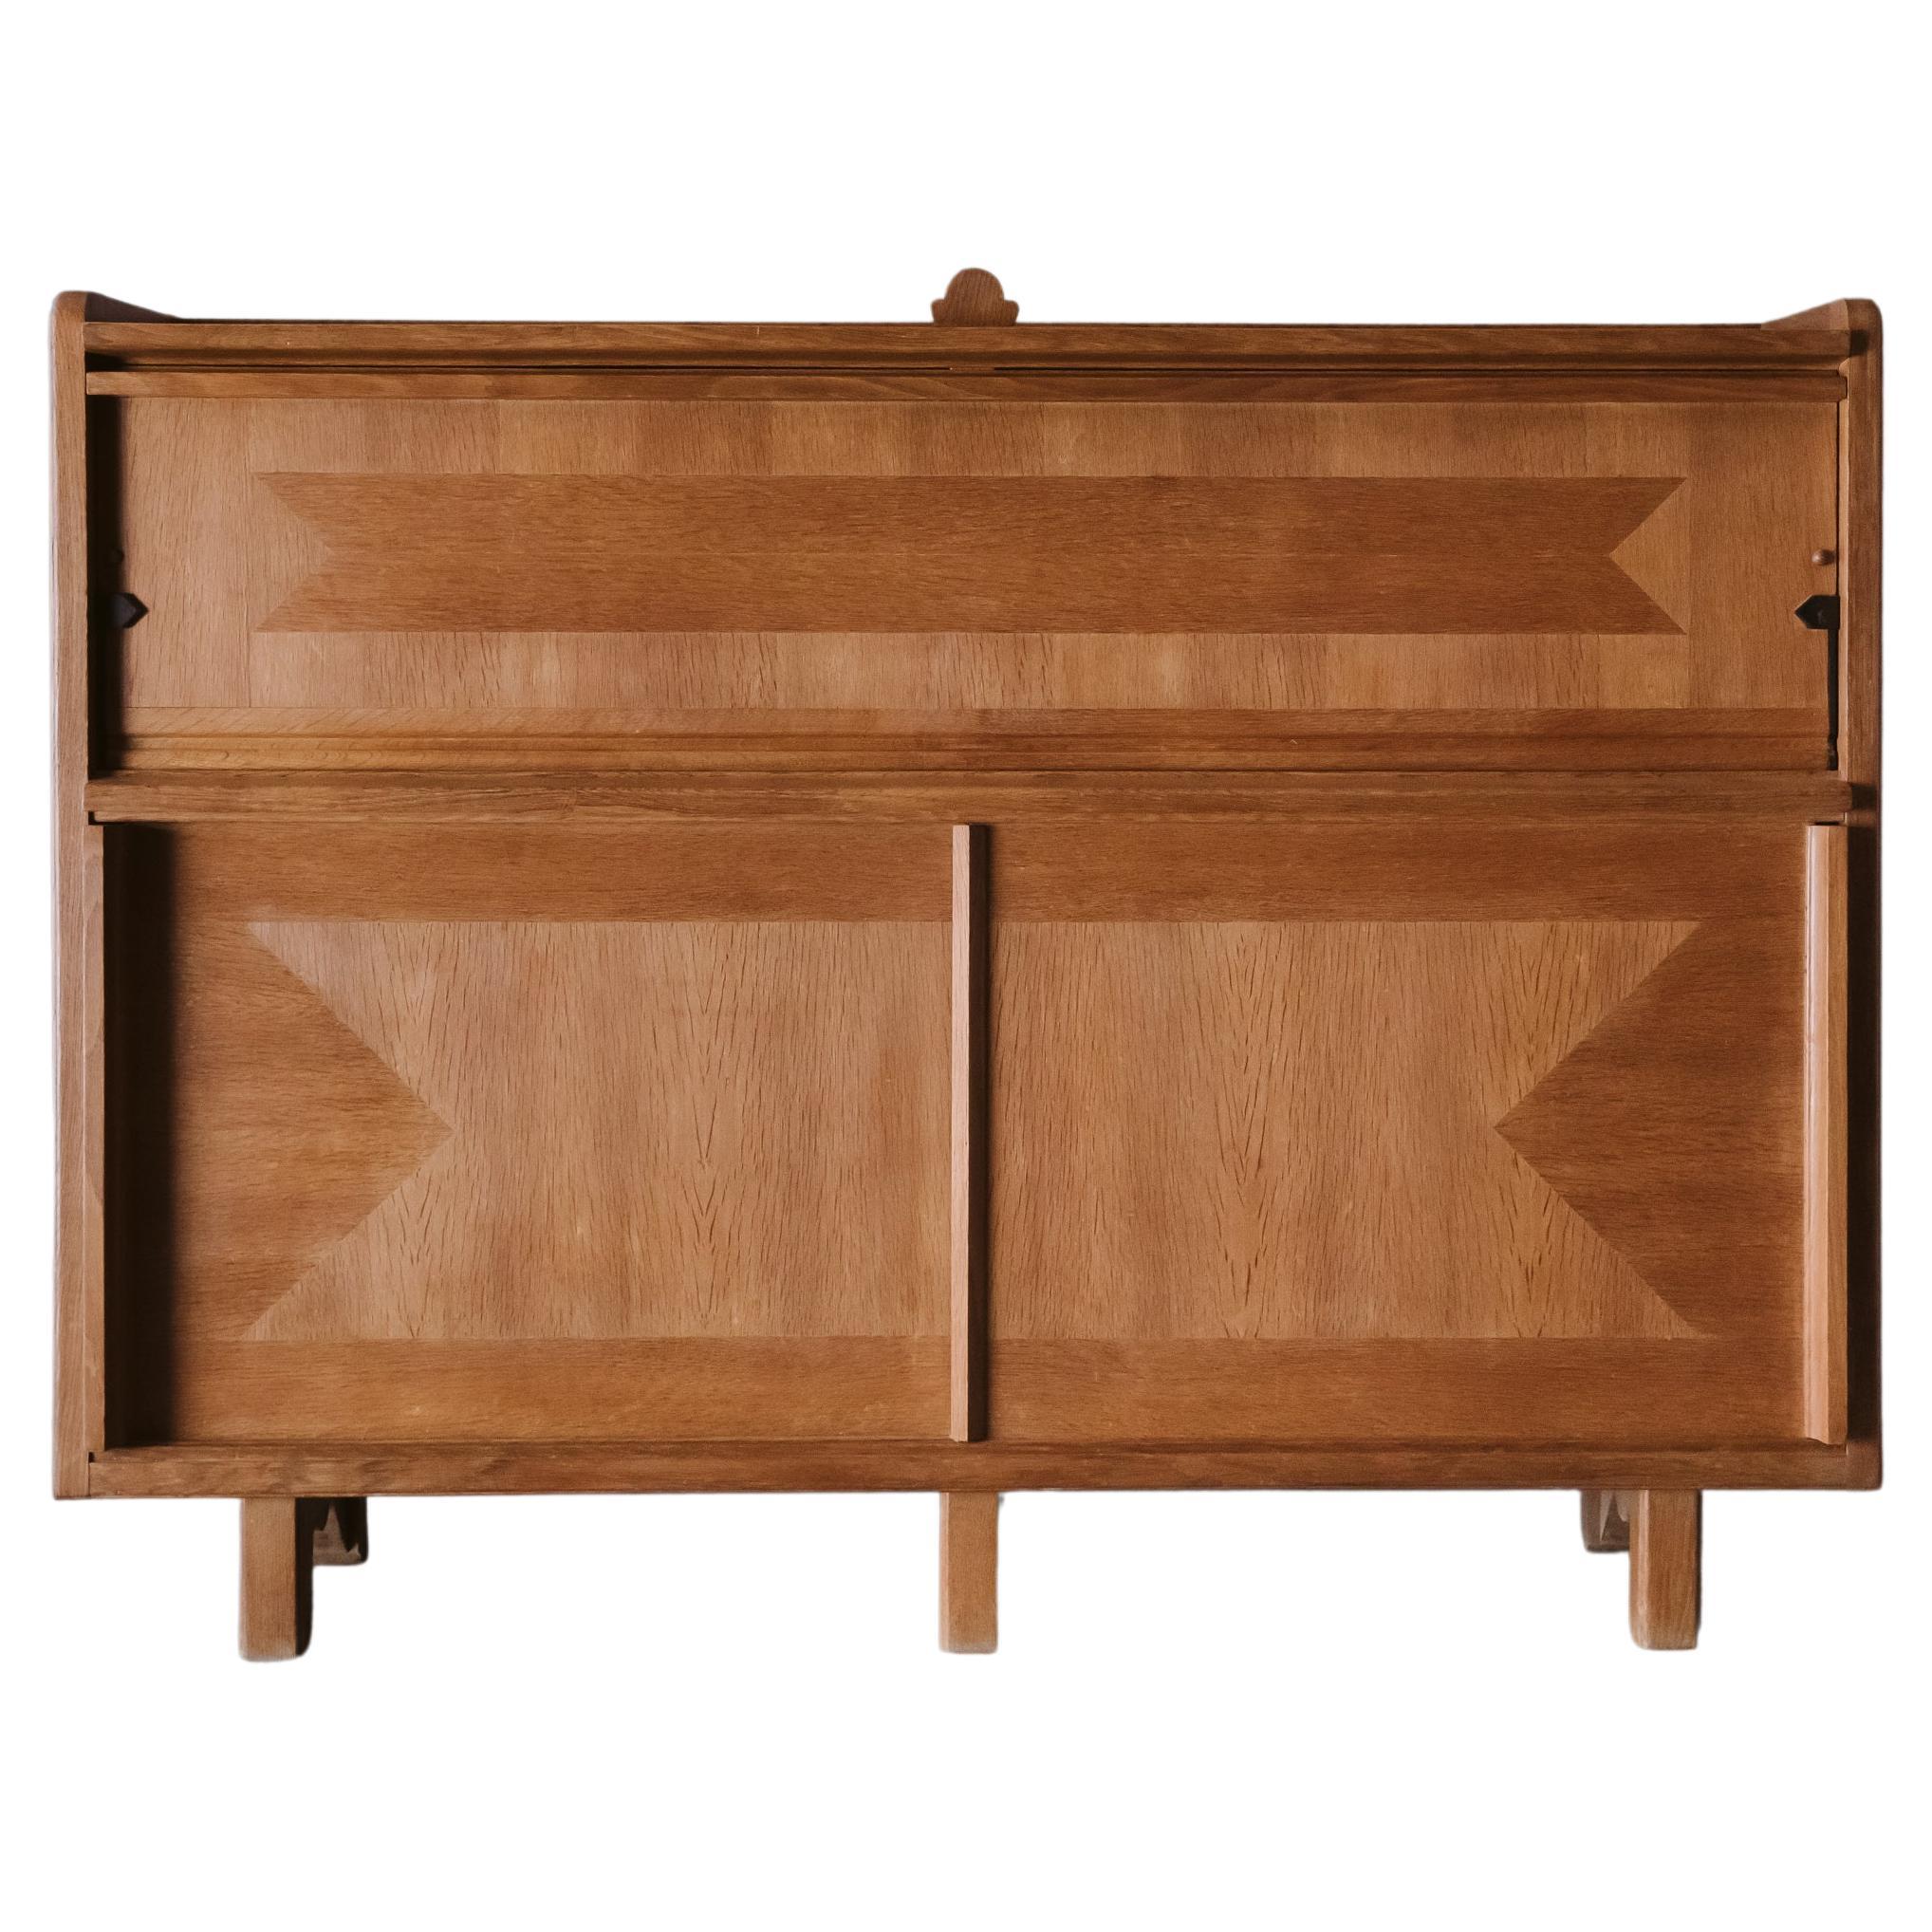 Vintage Oak Guillerme & Chambron Sideboard from France, circa 1960